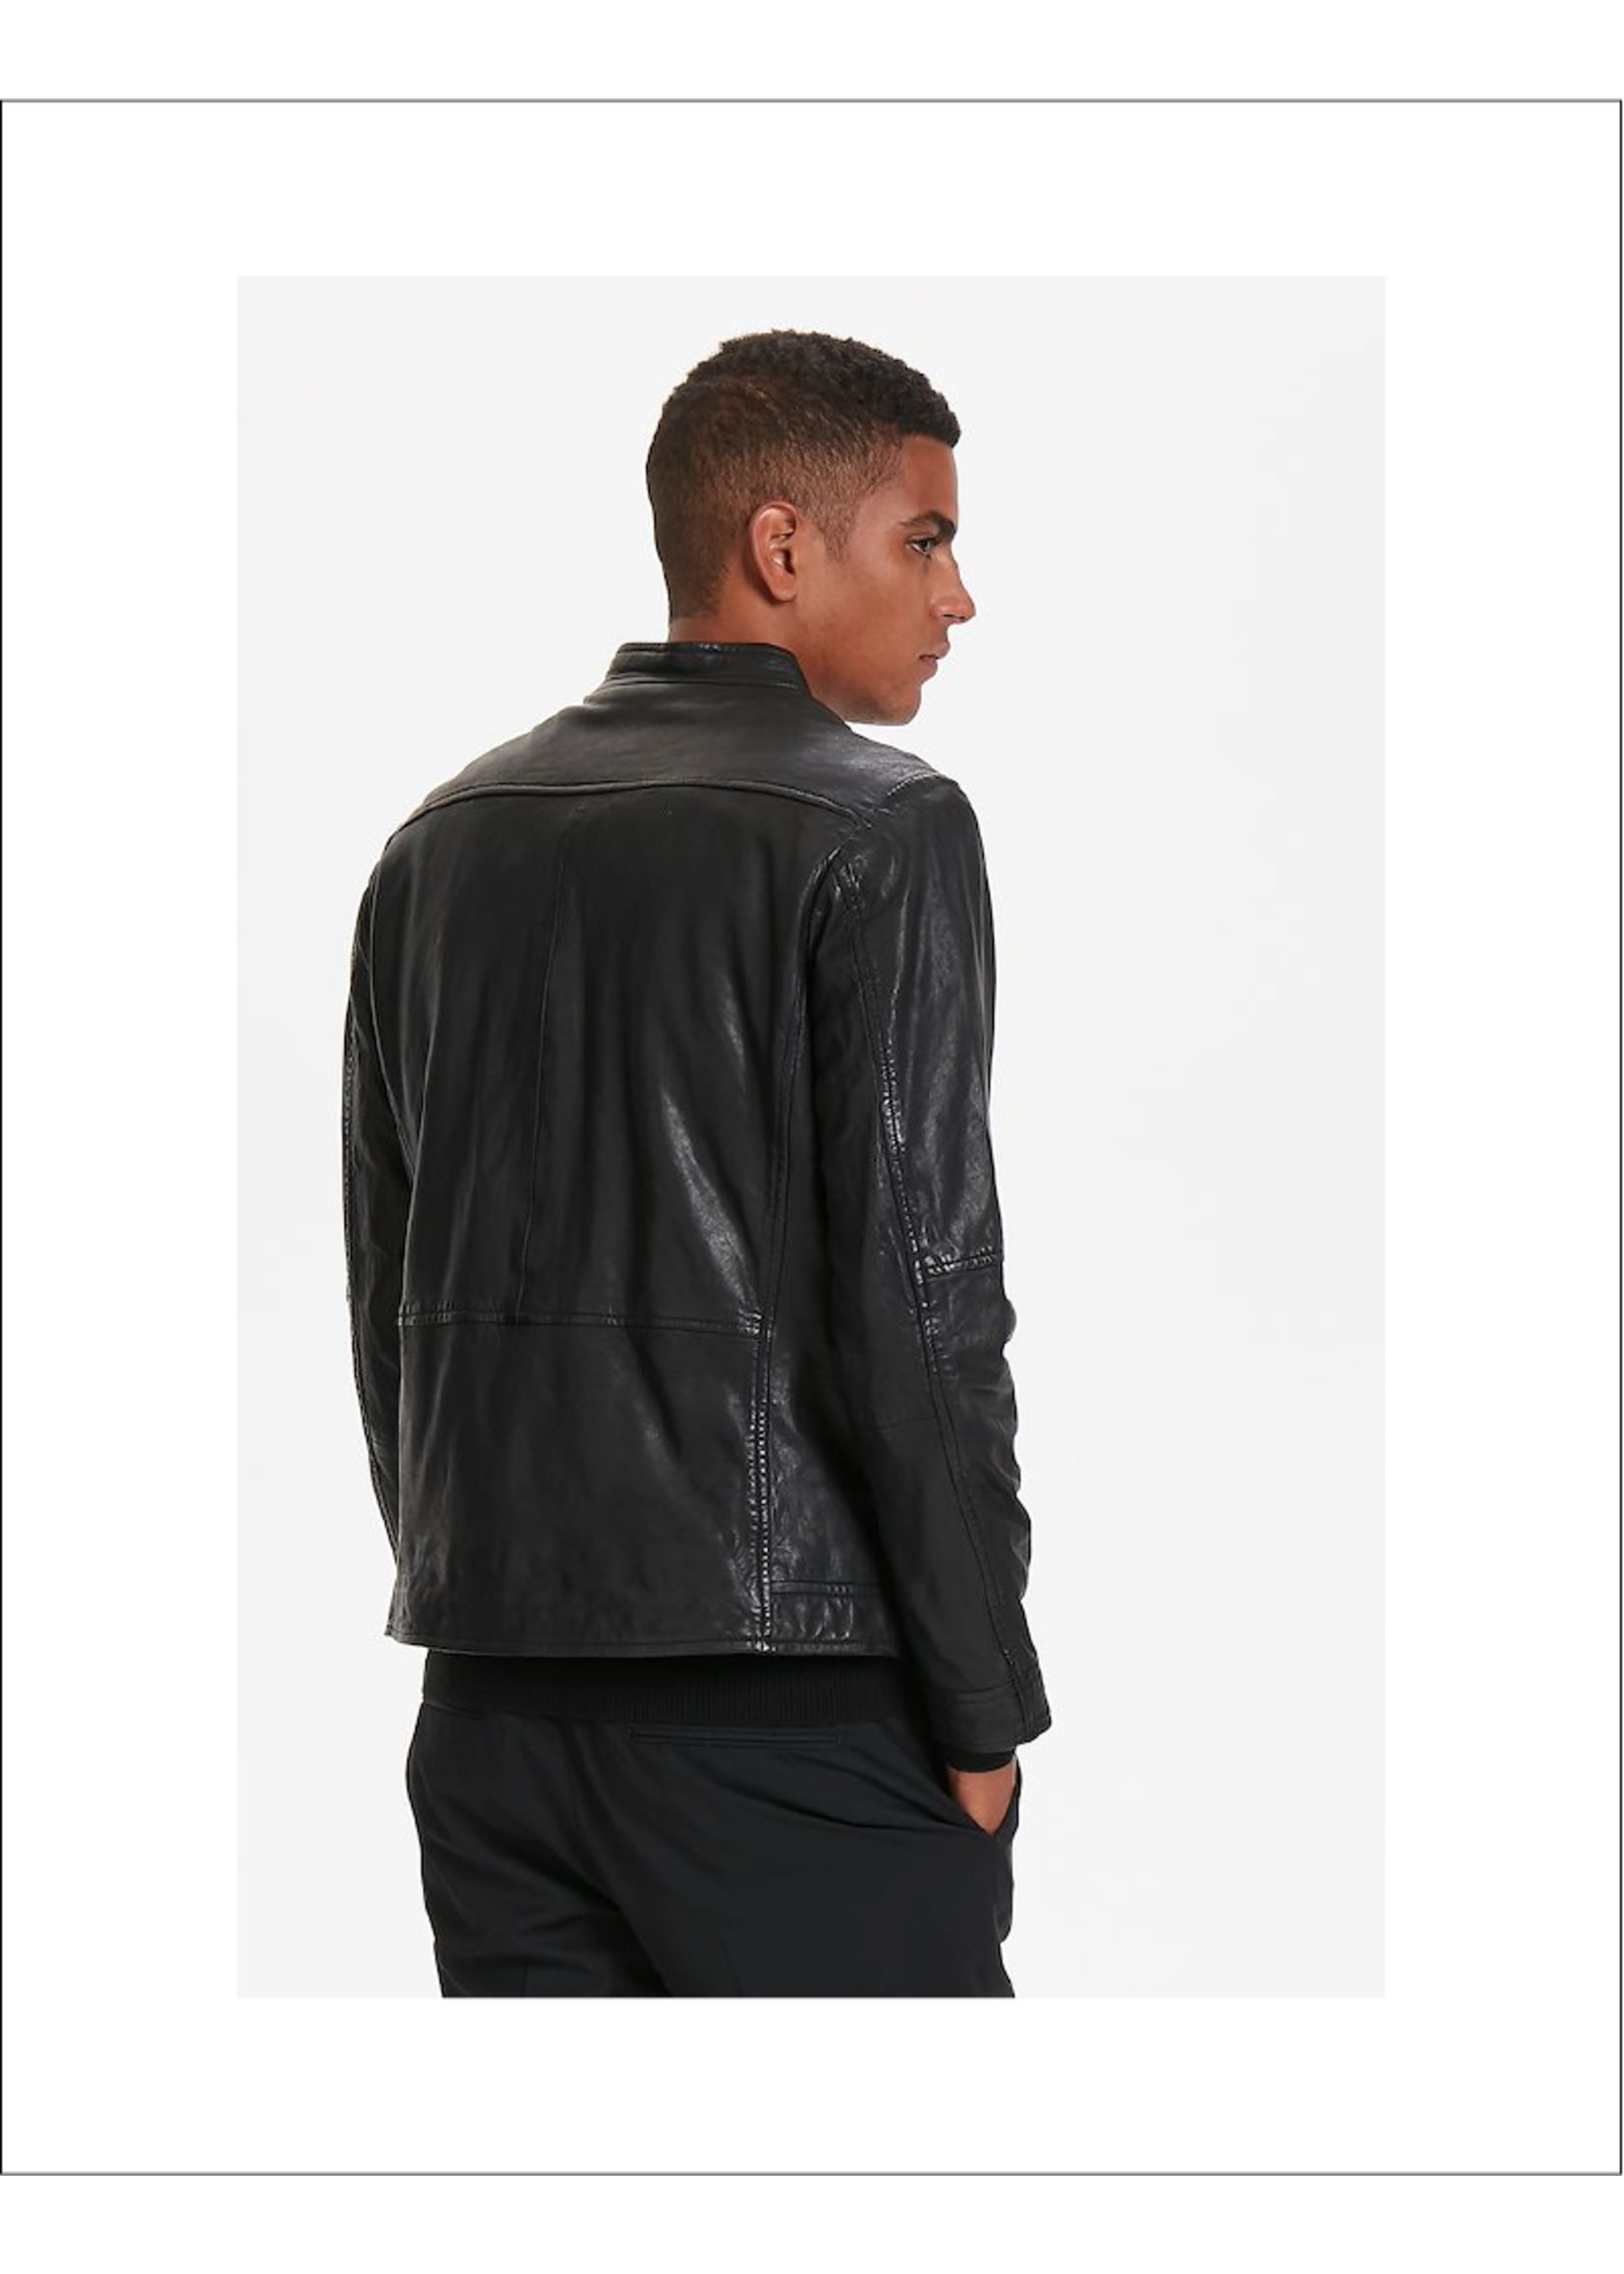 Matinique Matinique Adron Zip Up Leather Jacket